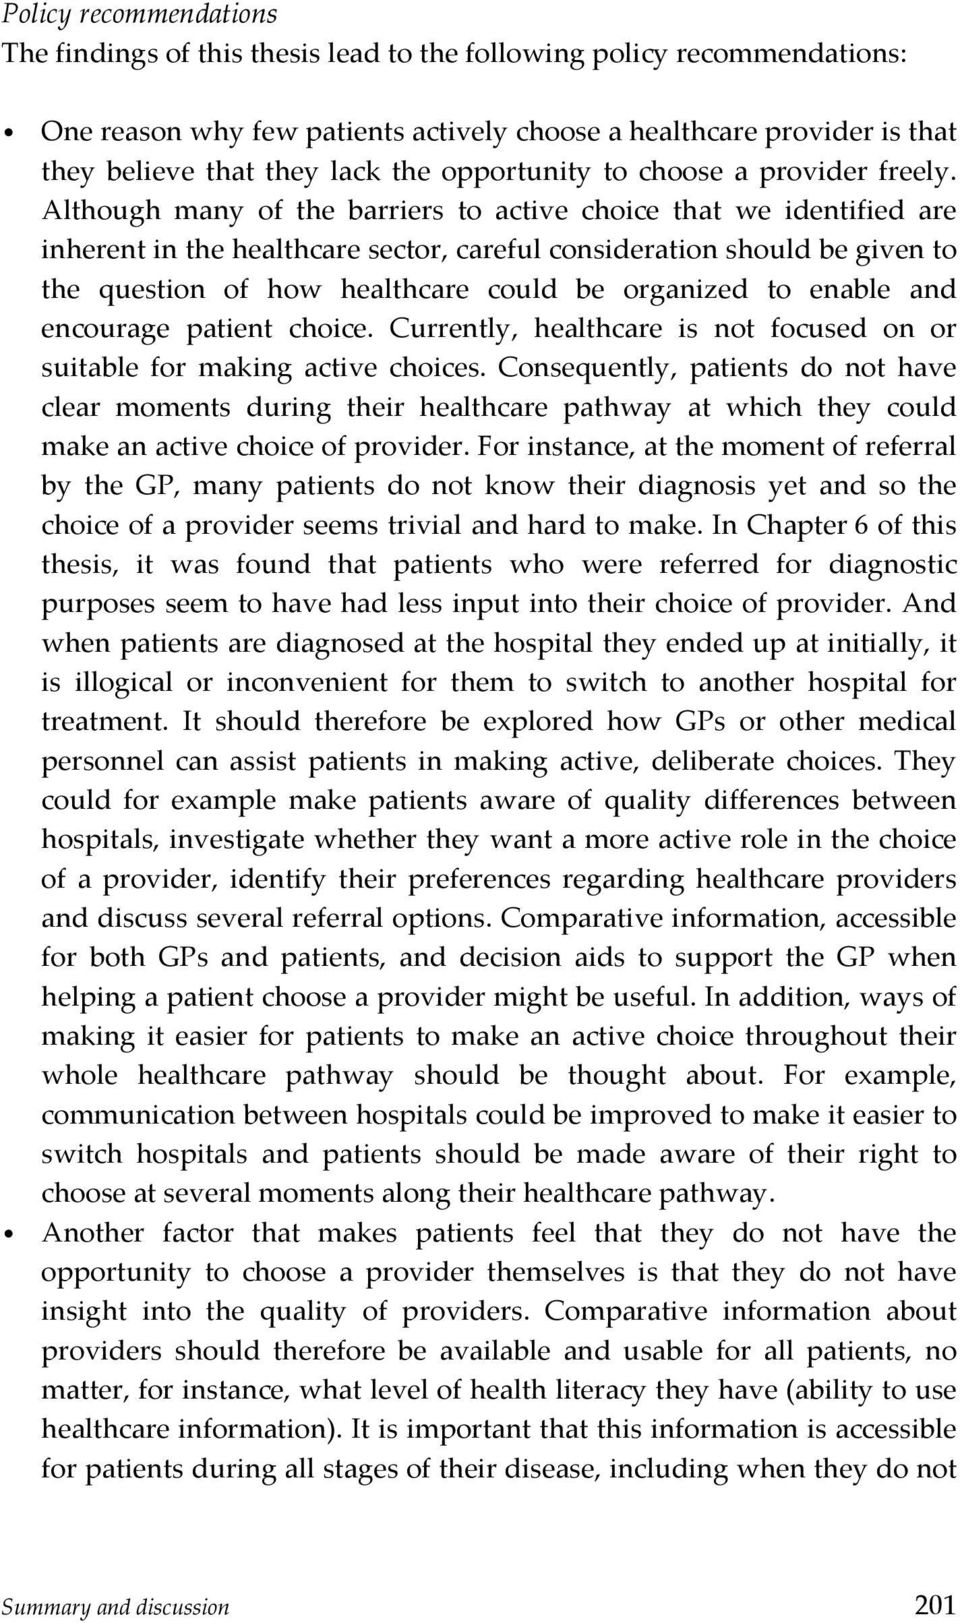 Although many of the barriers to active choice that we identified are inherentinthehealthcaresector,carefulconsiderationshouldbegivento the question of how healthcare could be organized to enable and